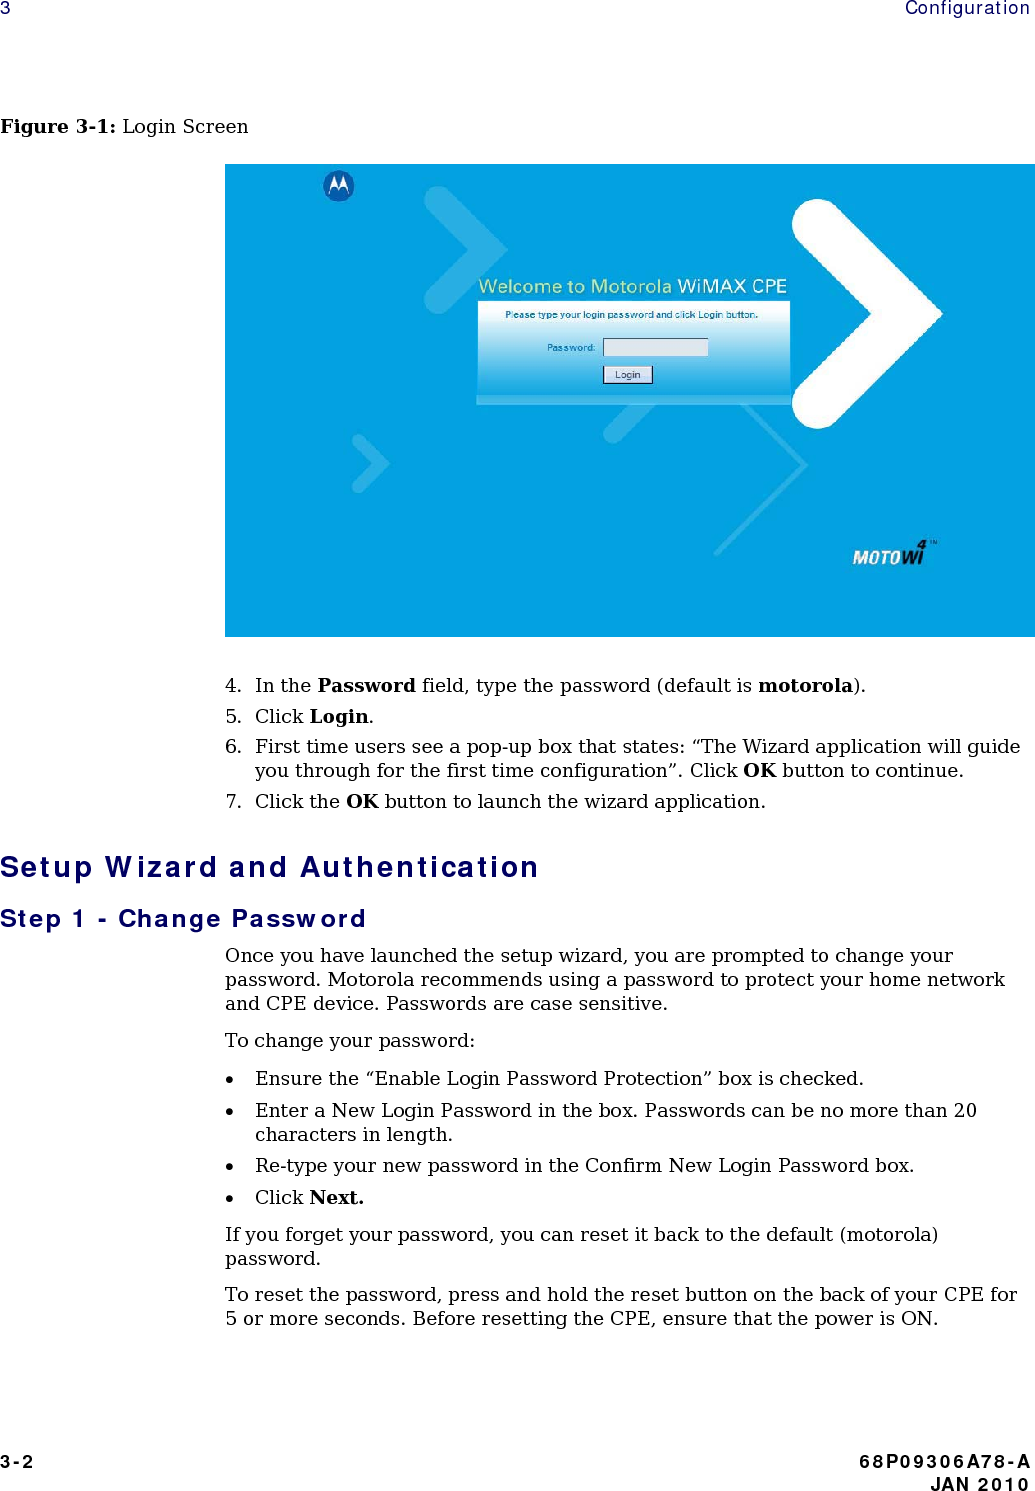 3   Configuration Figure 3-1: Login Screen   4. In the Password field, type the password (default is motorola). 5. Click Login. 6. First time users see a pop-up box that states: “The Wizard application will guide you through for the first time configuration”. Click OK button to continue. 7. Click the OK button to launch the wizard application. Setup Wizard and Authentication Step 1 - Change Password Once you have launched the setup wizard, you are prompted to change your password. Motorola recommends using a password to protect your home network and CPE device. Passwords are case sensitive. To change your password: • Ensure the “Enable Login Password Protection” box is checked. • Enter a New Login Password in the box. Passwords can be no more than 20 characters in length. • Re-type your new password in the Confirm New Login Password box. • Click Next. If you forget your password, you can reset it back to the default (motorola) password. To reset the password, press and hold the reset button on the back of your CPE for 5 or more seconds. Before resetting the CPE, ensure that the power is ON.  3-2  68P09306A78-A    JAN 2010 